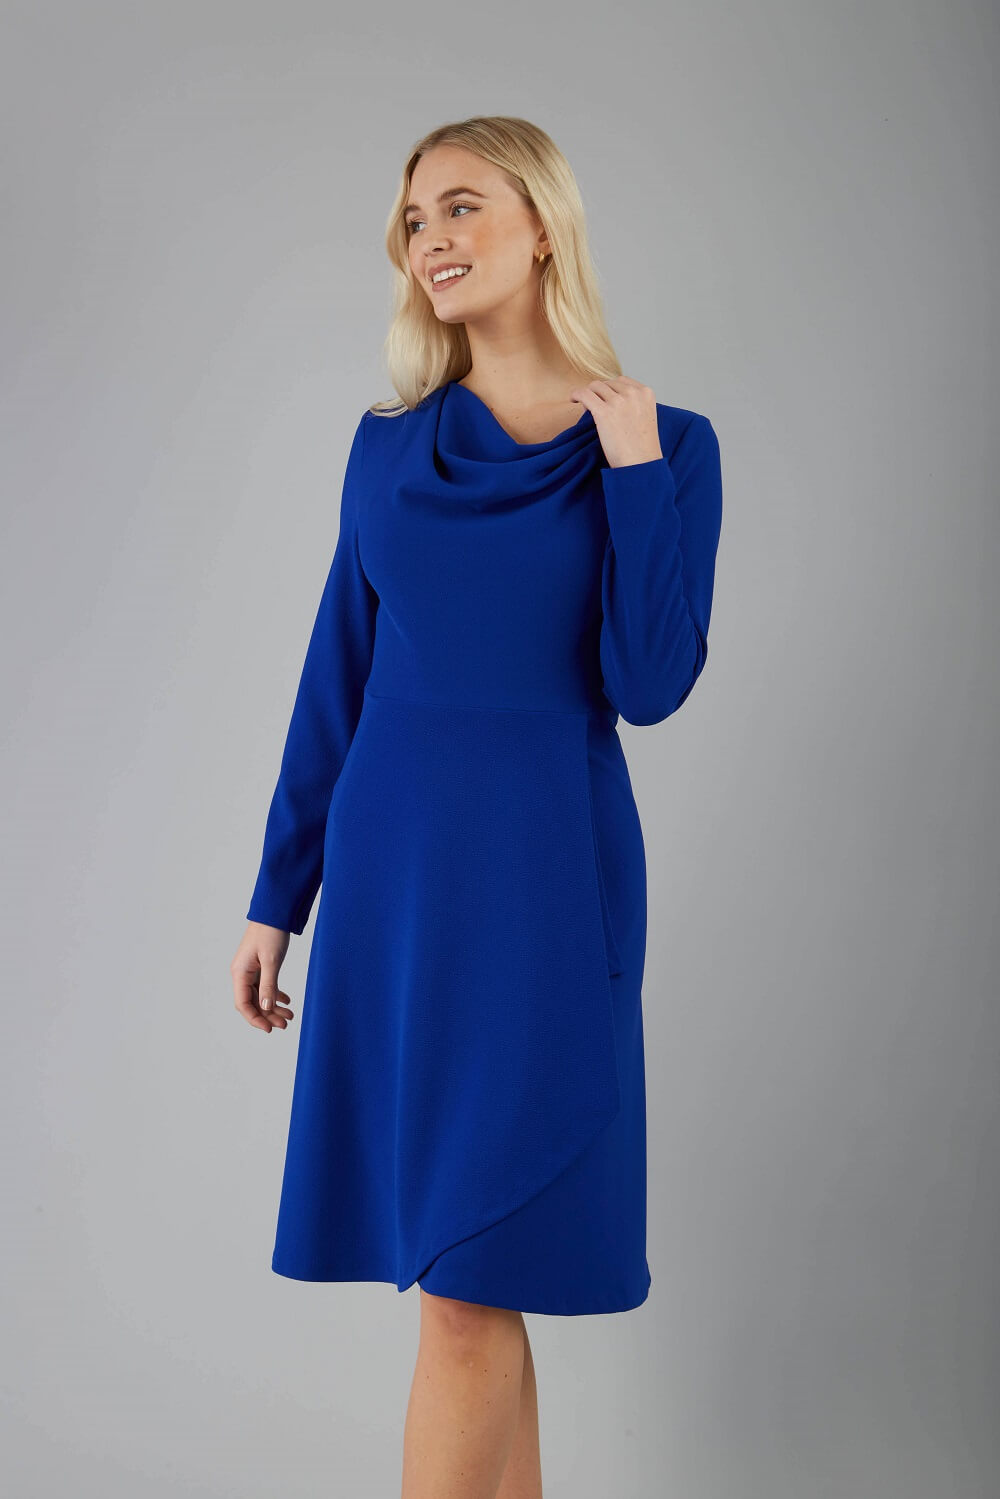 blonde model is wearing diva catwalk moraig swing long sleeve dress with high cowl neckline and wrap skirt in cobalt blue front